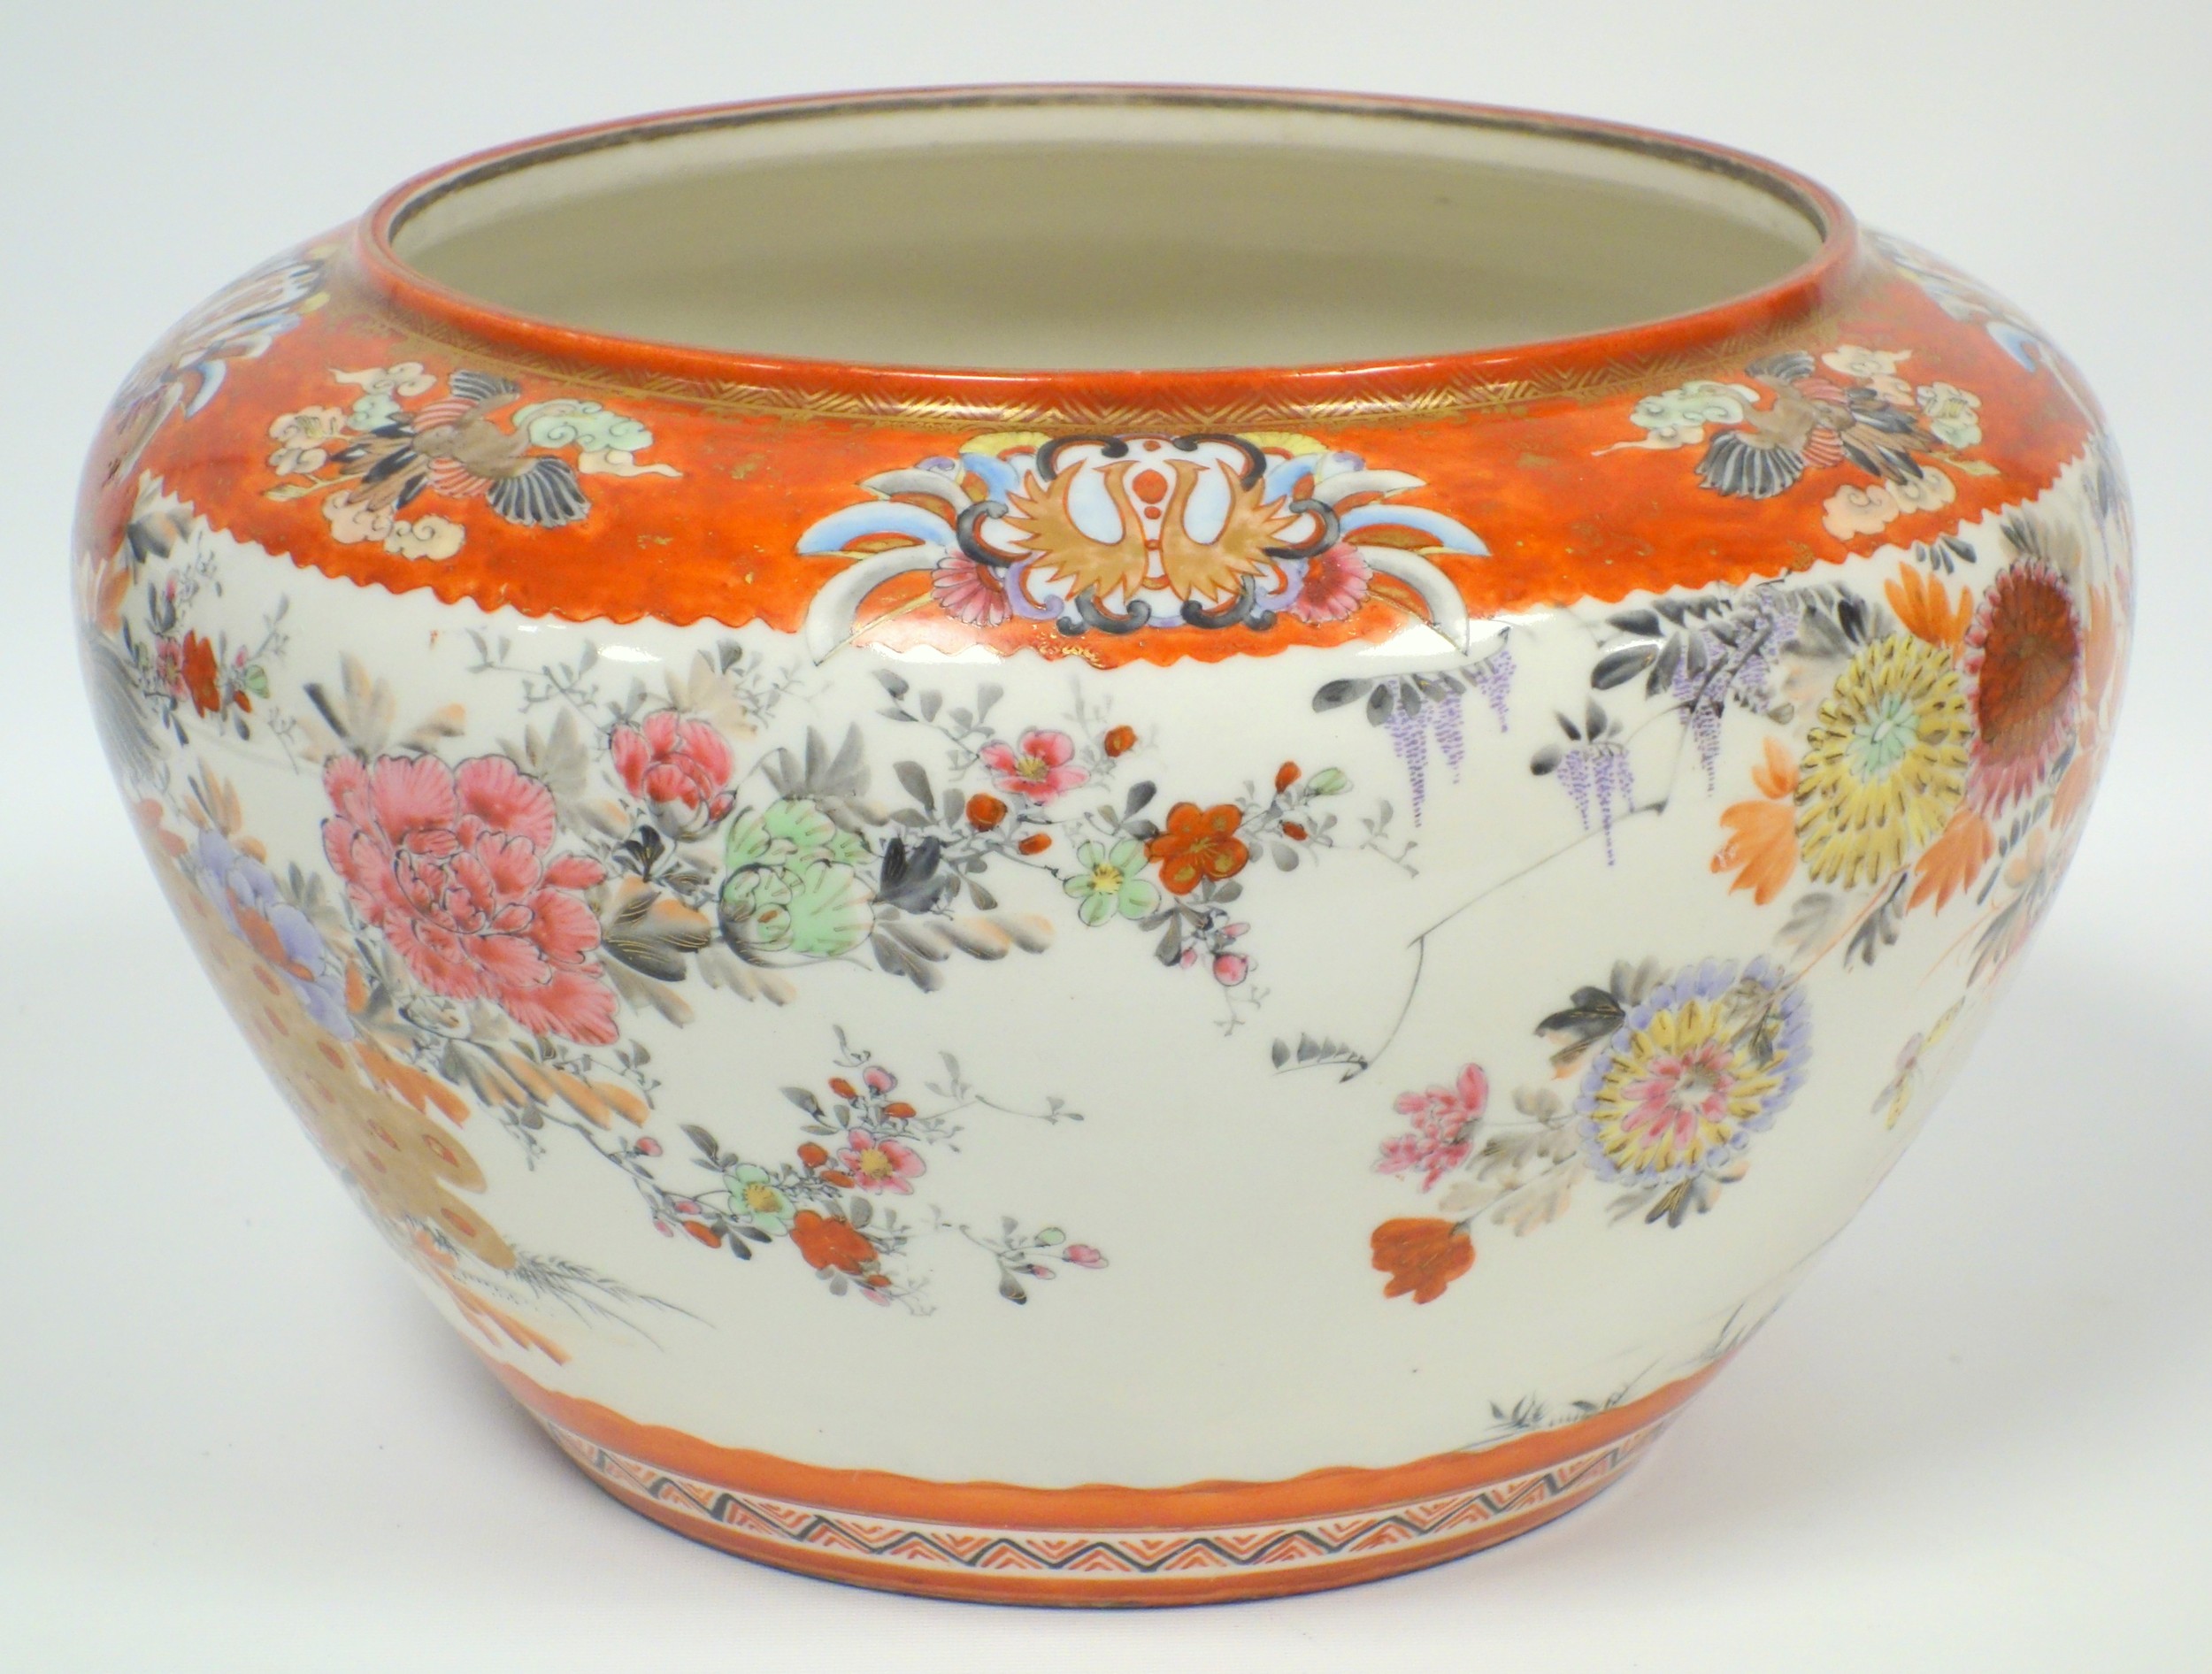 Late 19th century Japanese Kutani porcelain circular bowl painted with peacocks, other birds and - Image 2 of 7